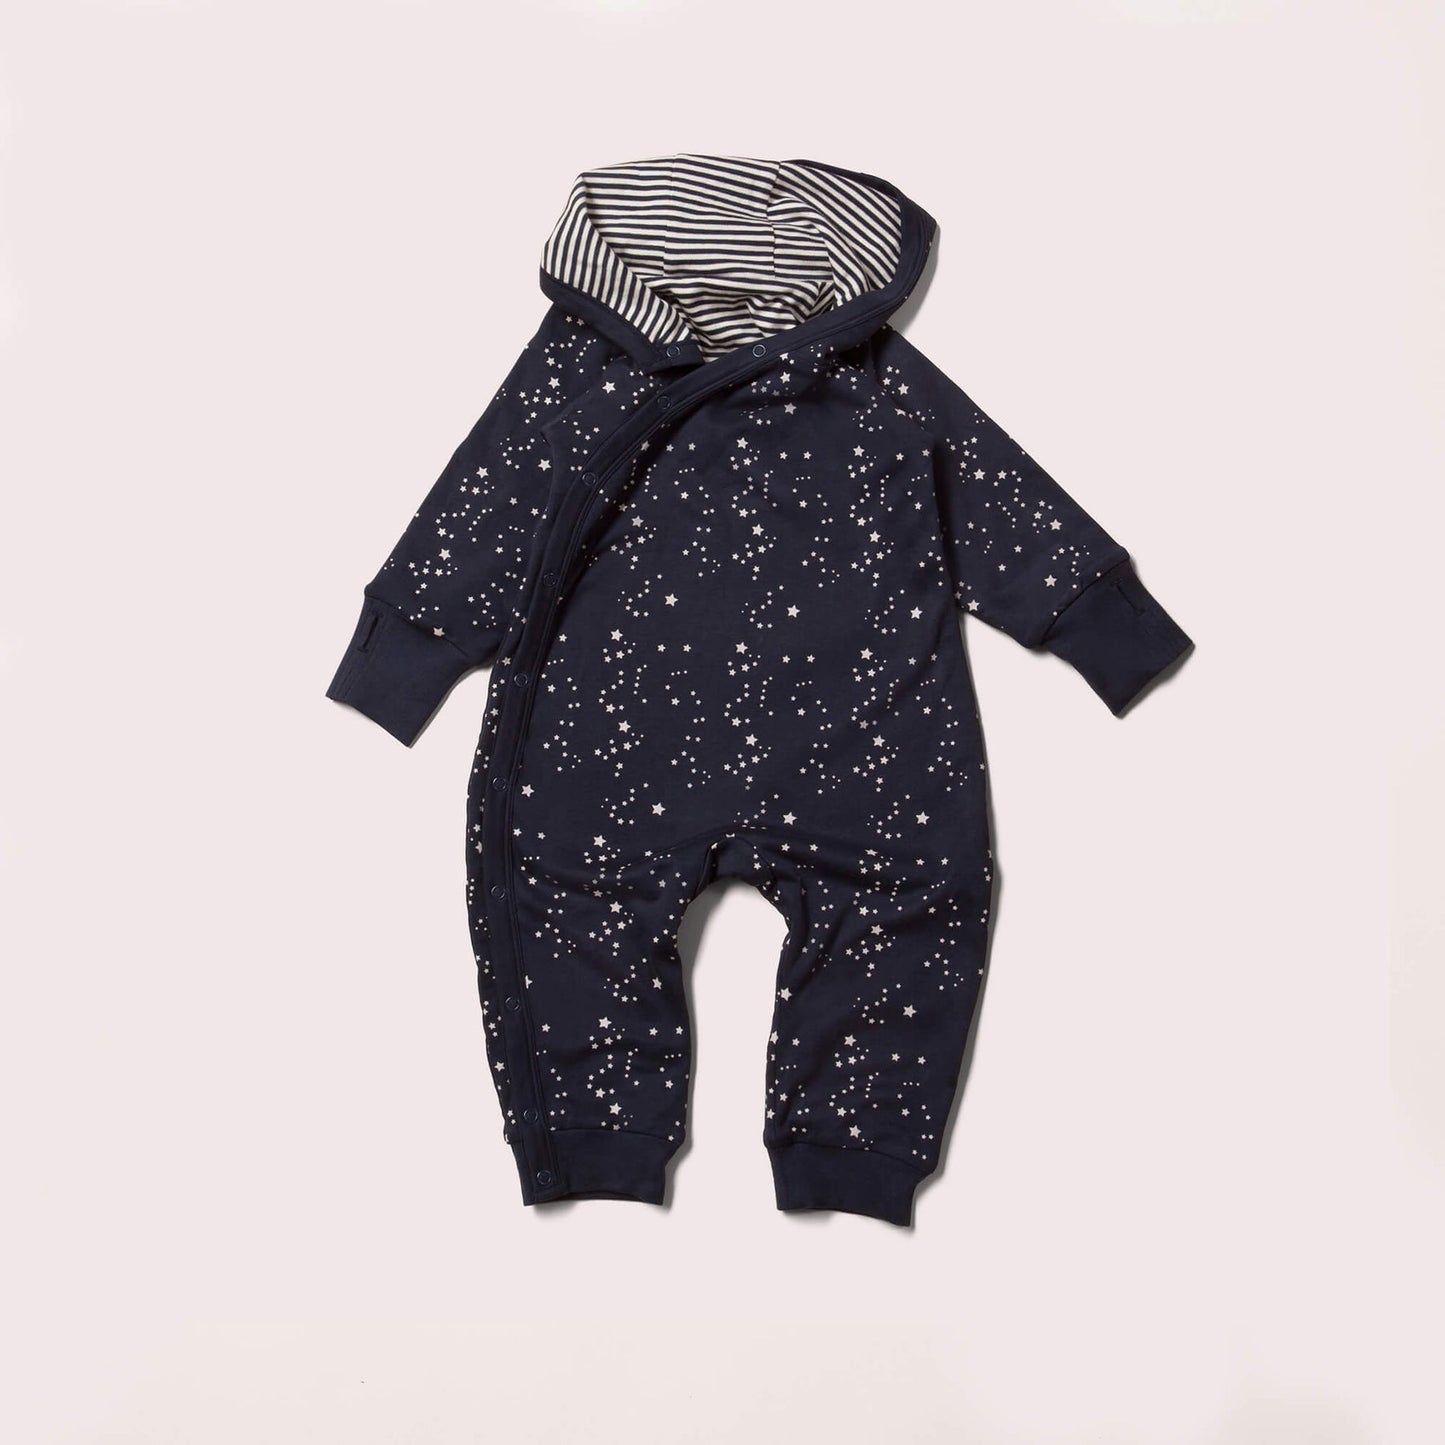 LGR Starry Night Reversible Snug as a Bug Suit